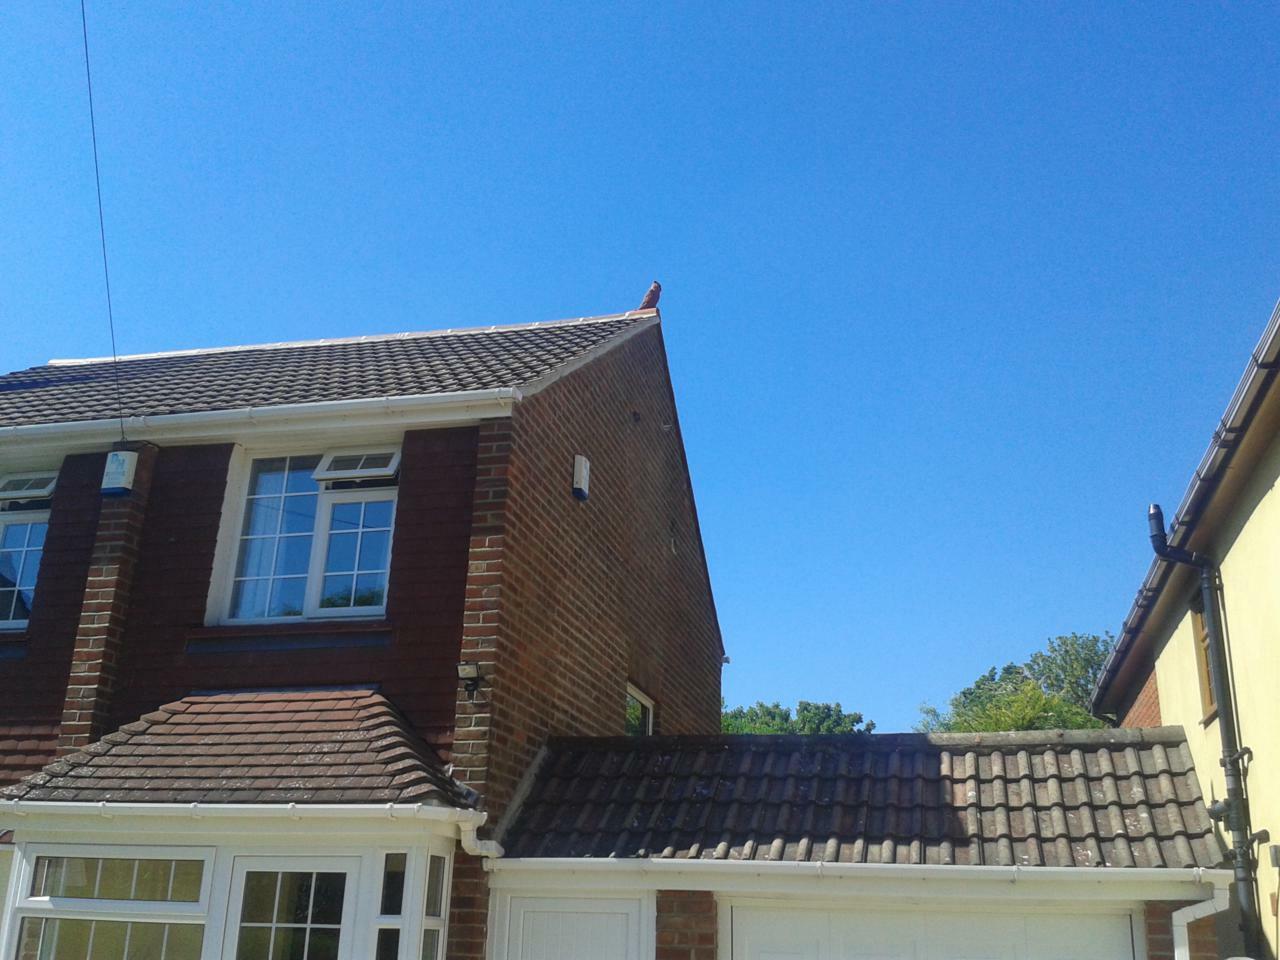 Owl roof finial installed on a gable end in Meopham